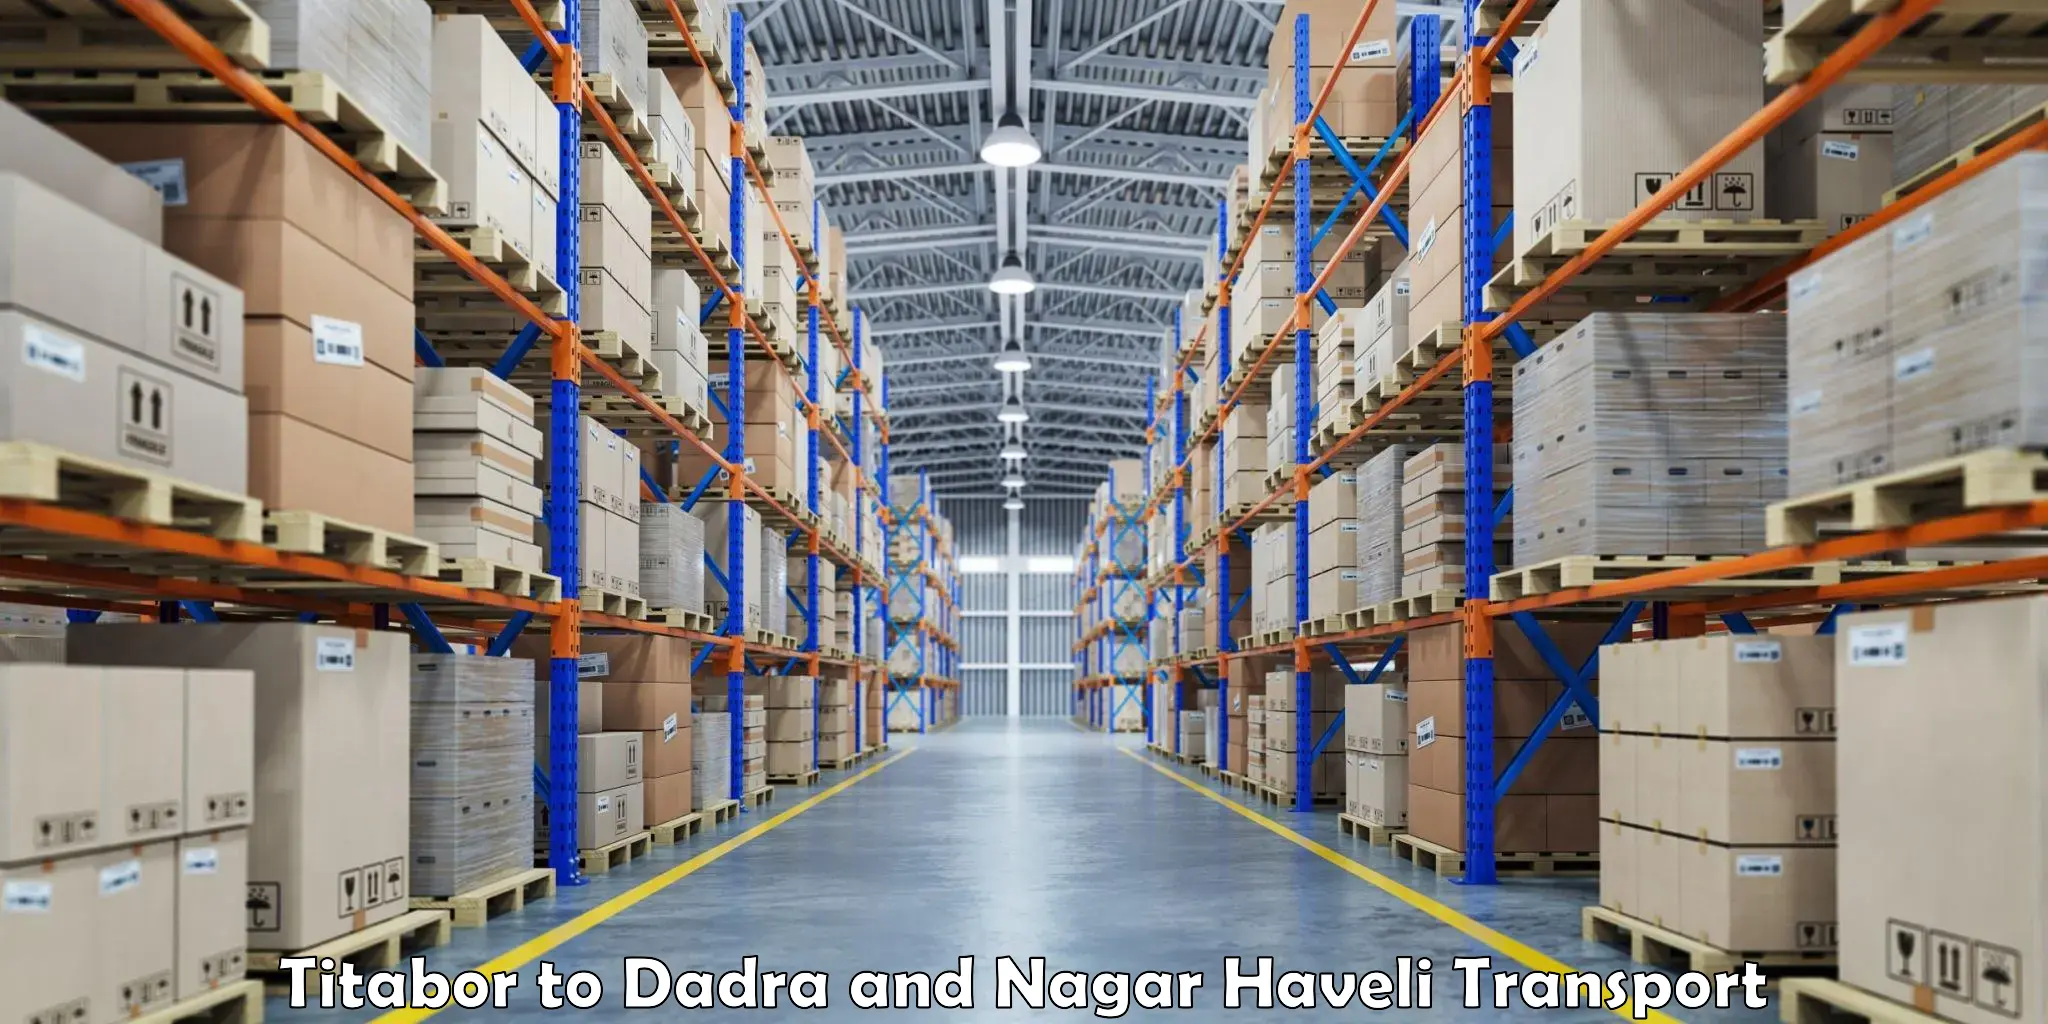 Two wheeler transport services Titabor to Dadra and Nagar Haveli